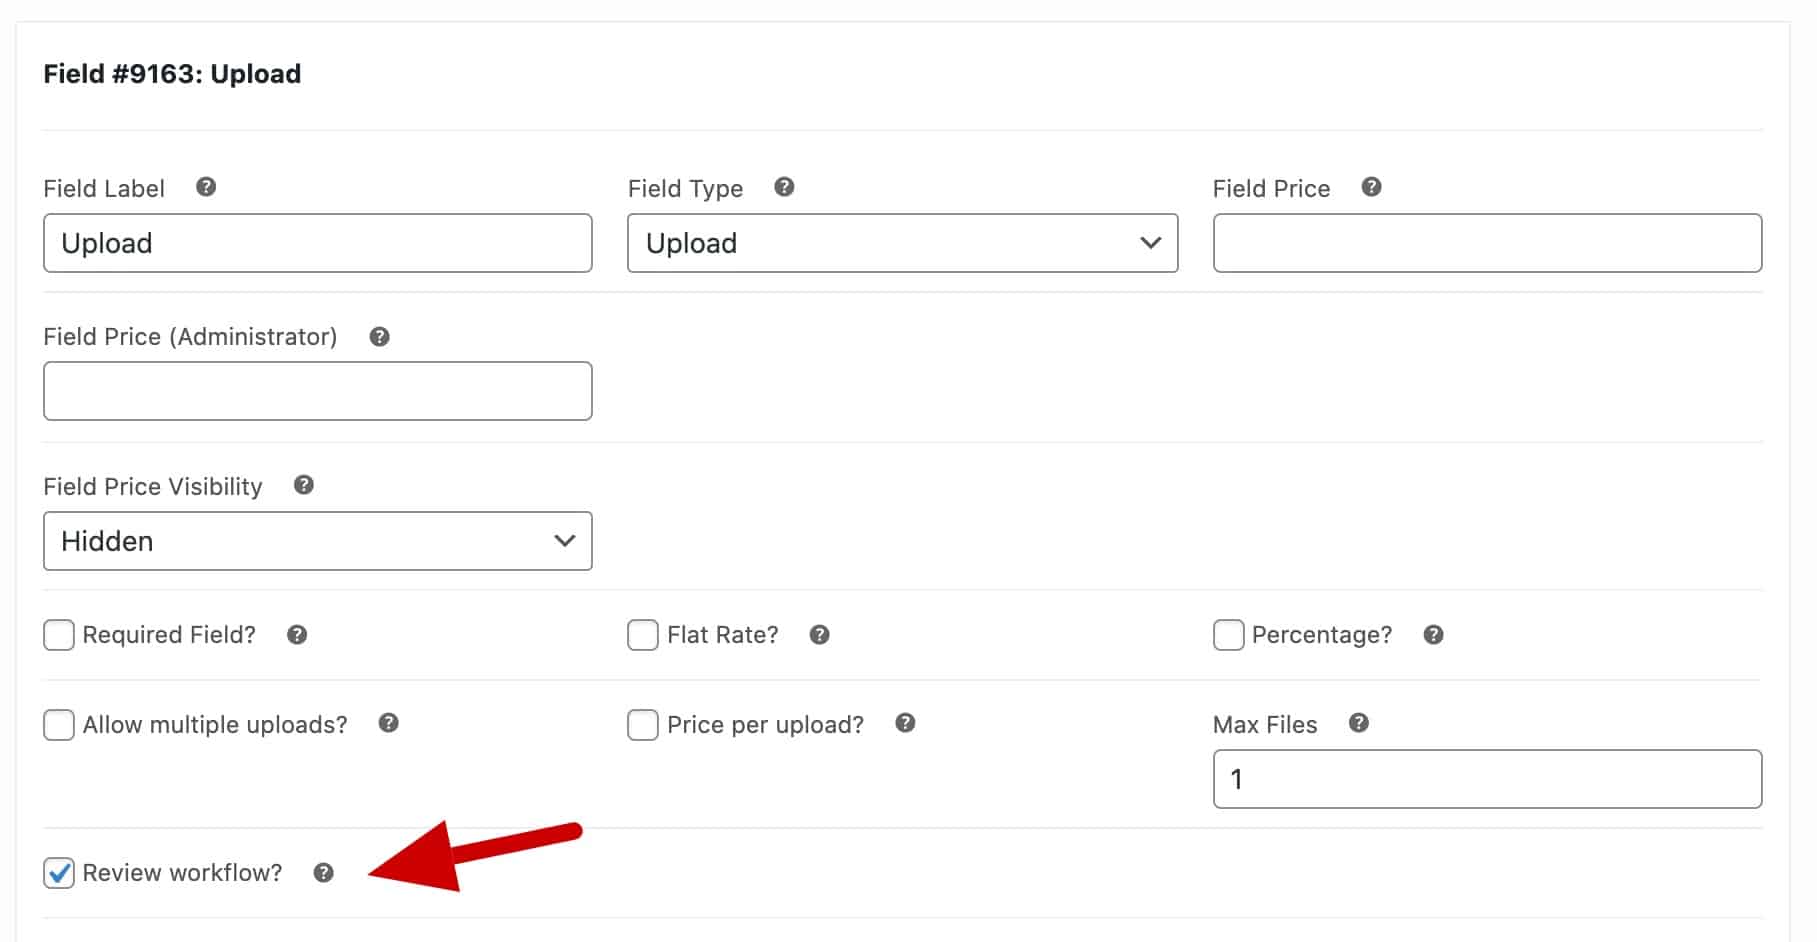 WooCommerce file review workflow setting